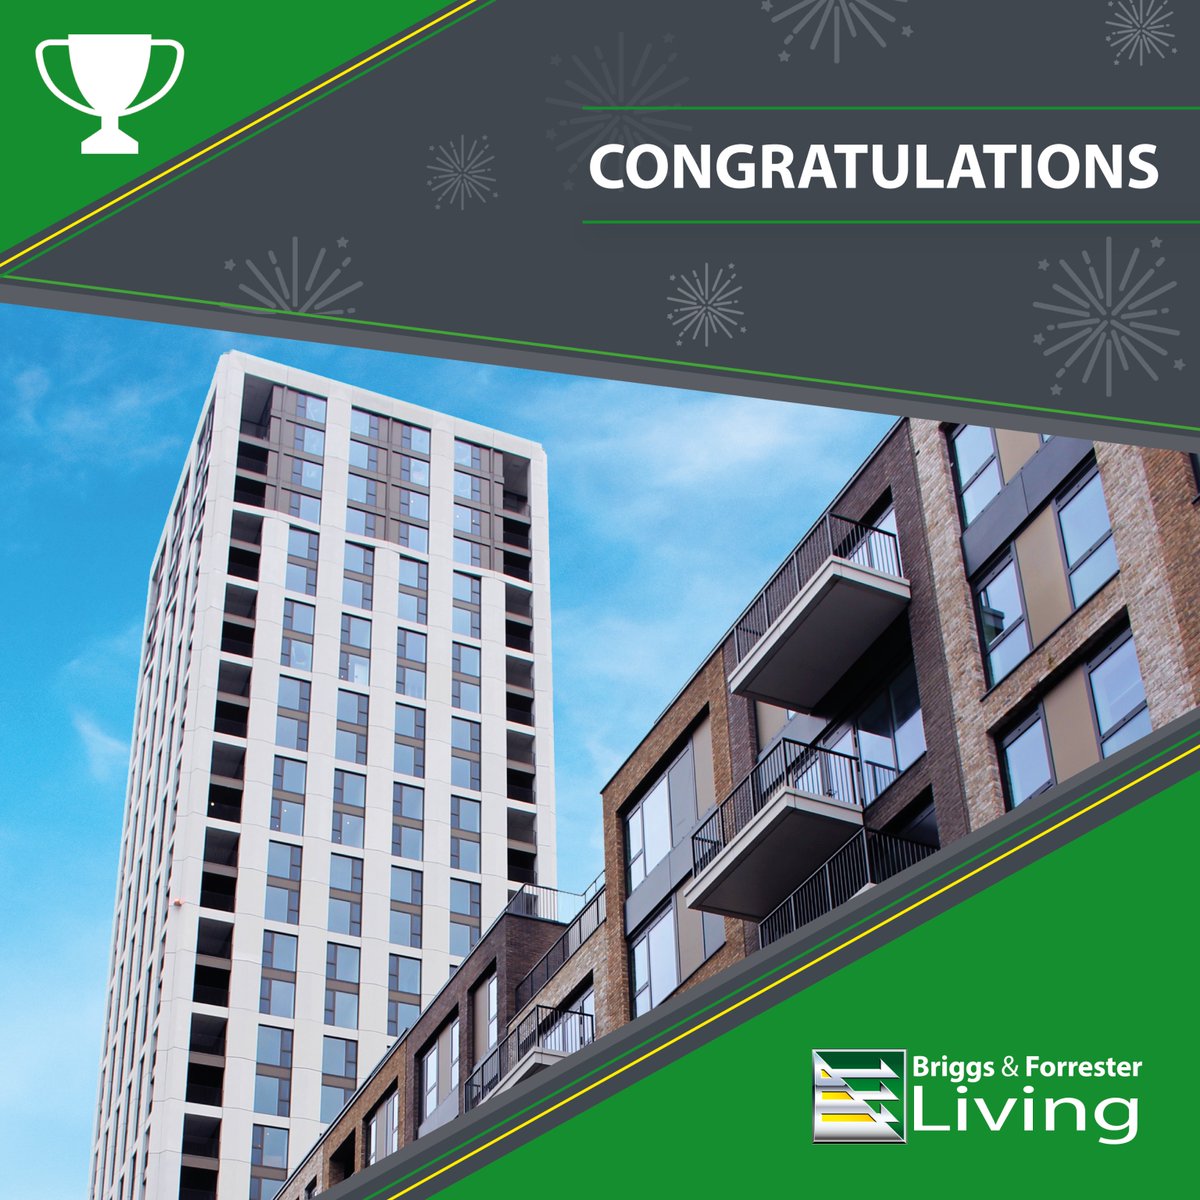 🏆 CONTRACTOR OF THE MONTH 🏆 The Customer Service Team at Chelsea Creek have awarded contractor of the month to Briggs & Forrester Living for April! Well done team ! #excellenceateverylevel #constructionuk #chelseacreek #contractor #TeamRecognition